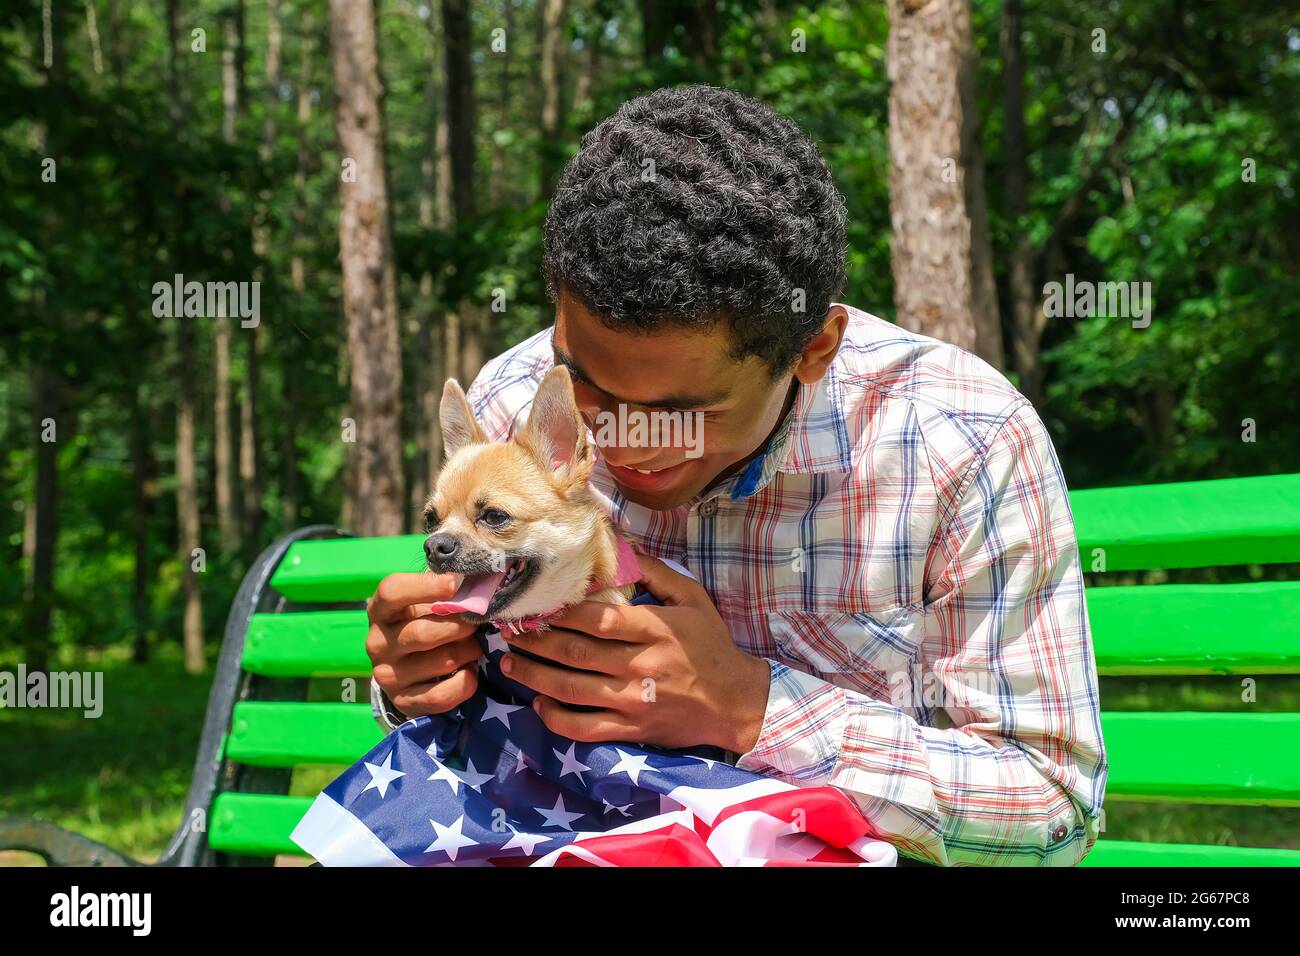 Afro American man holding a chihuahua dog wrapped in USA flag Stock Photo